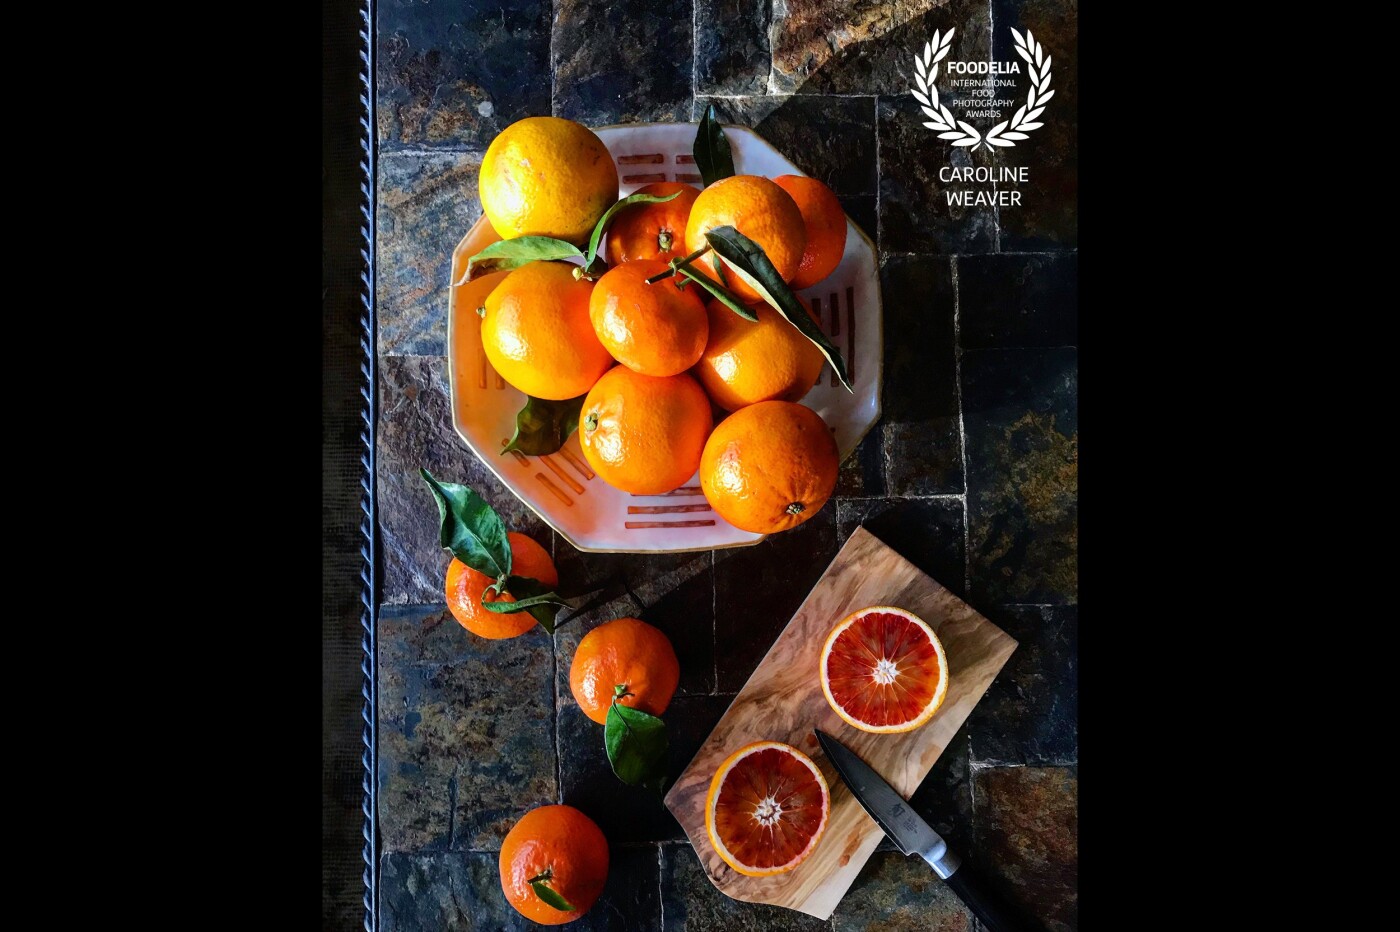 Using the last rays of the winter sun to recreate a Dutch still life. Juicy blood oranges and clementines in an ancient Chinese Ming dish reflecting back on a Welsh slate coffee table.